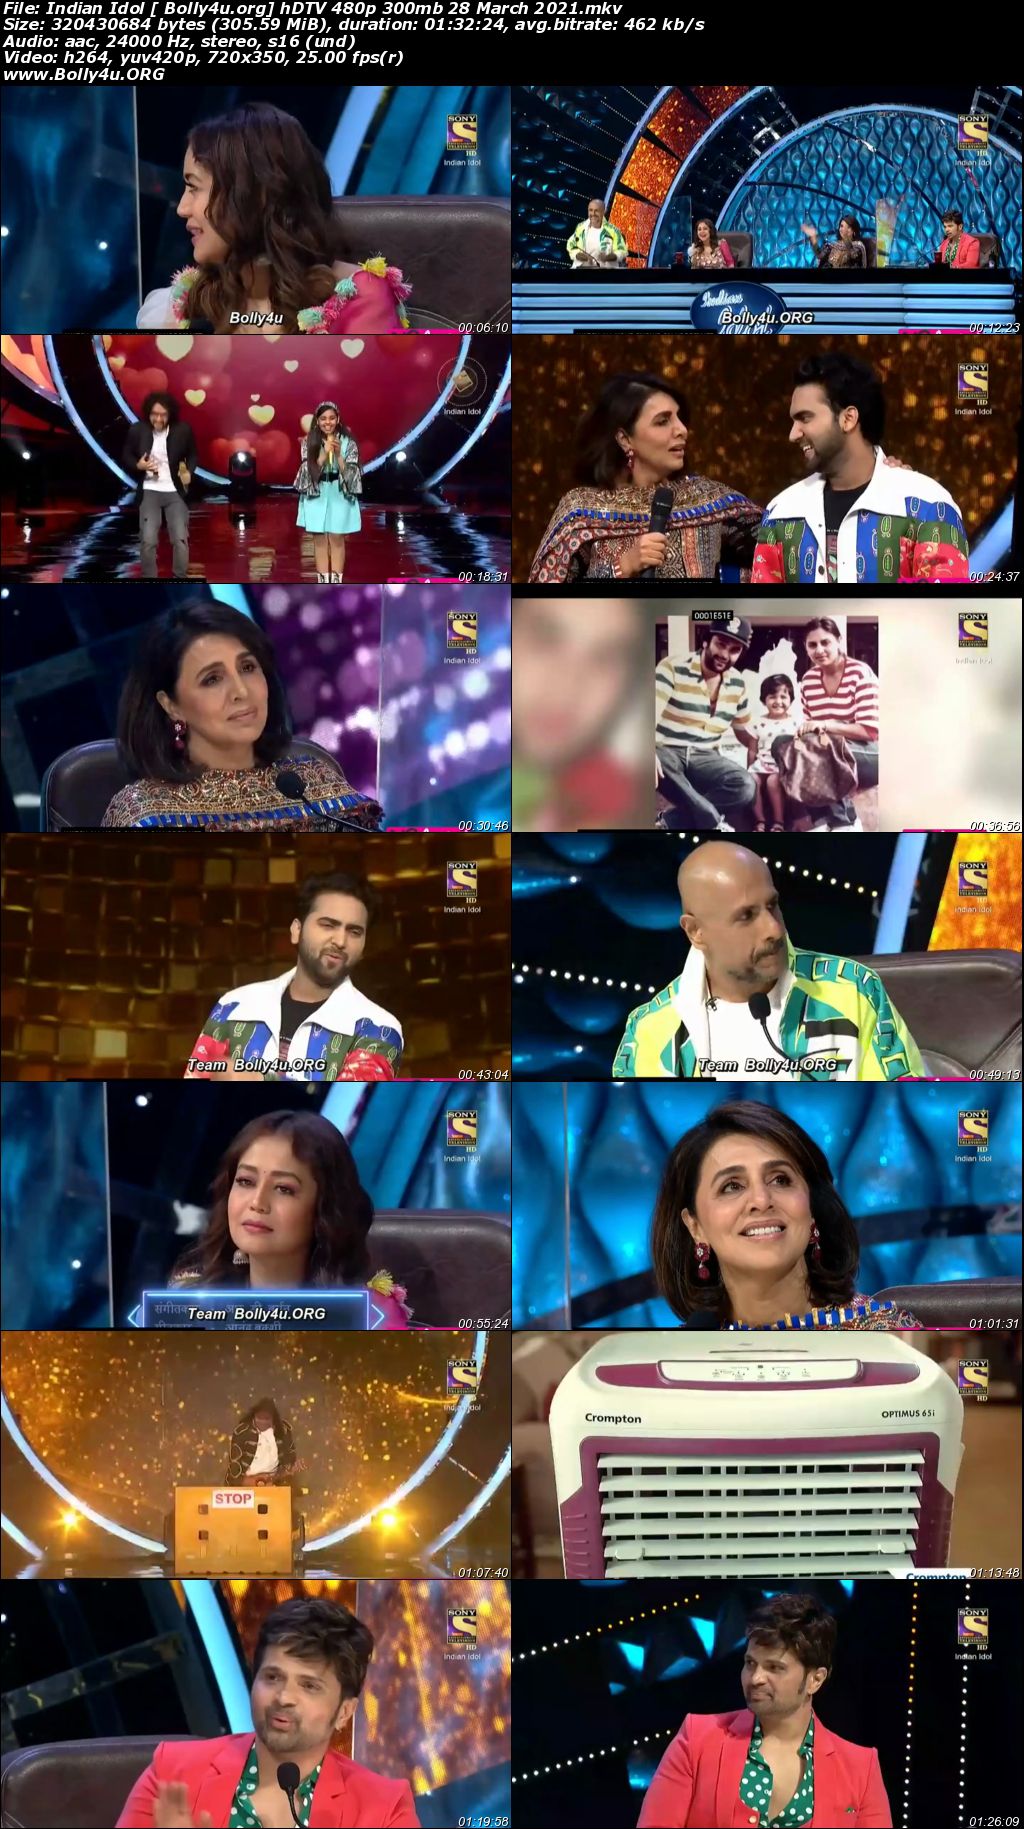 Indian Idol HDTV 480p 300mb 28 March 2021 Download